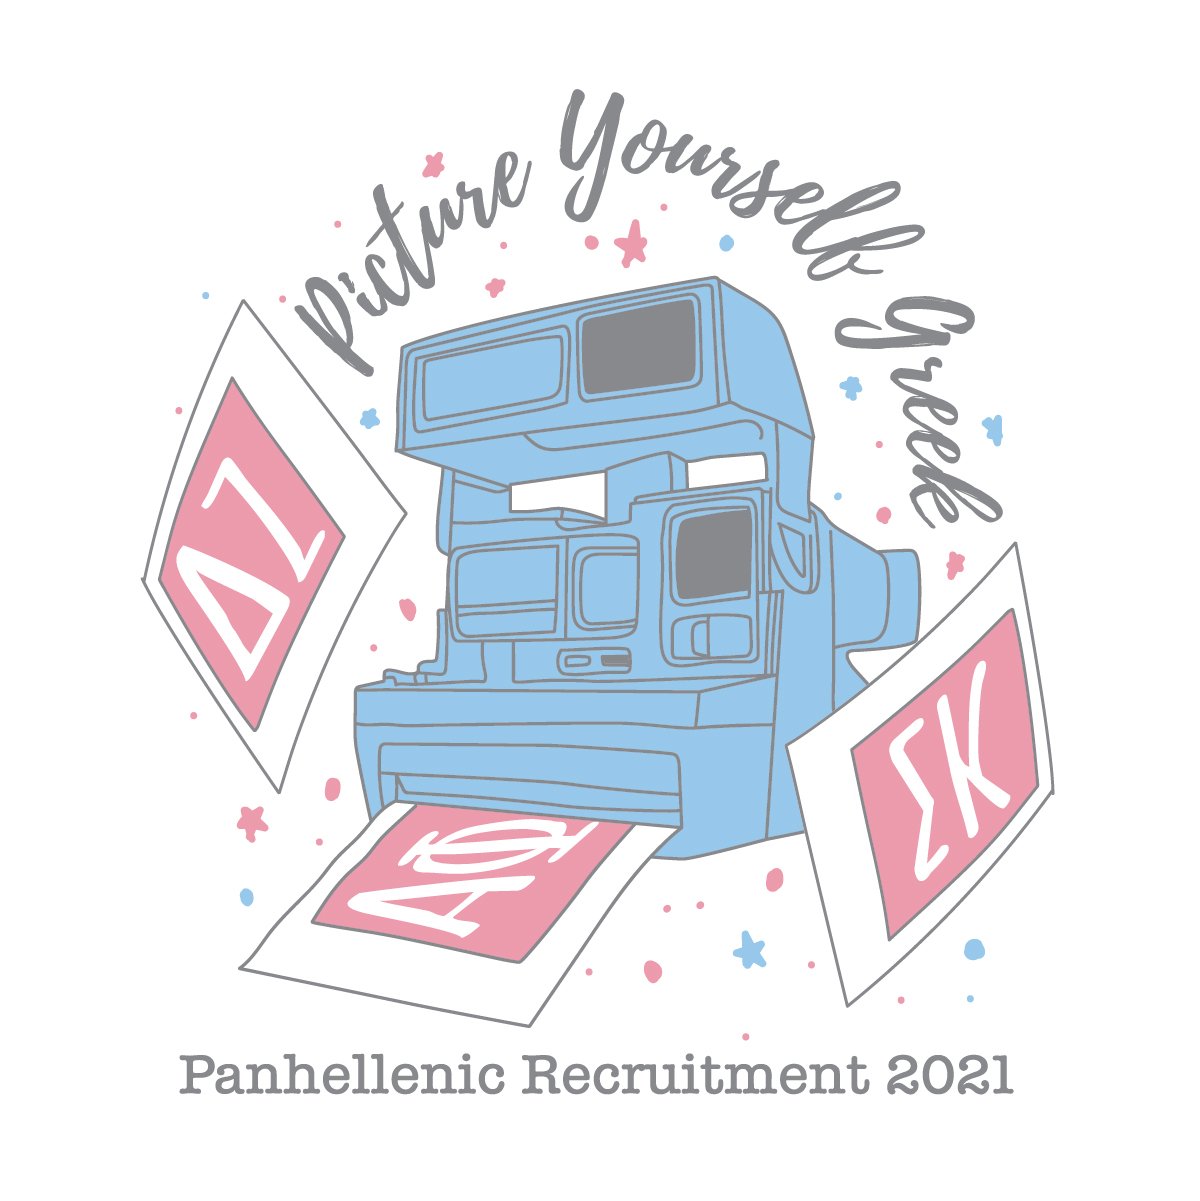 MH-PHC-46001_Panhellenic_Picture_Yourself_Recruitment_closeup_front.jpg